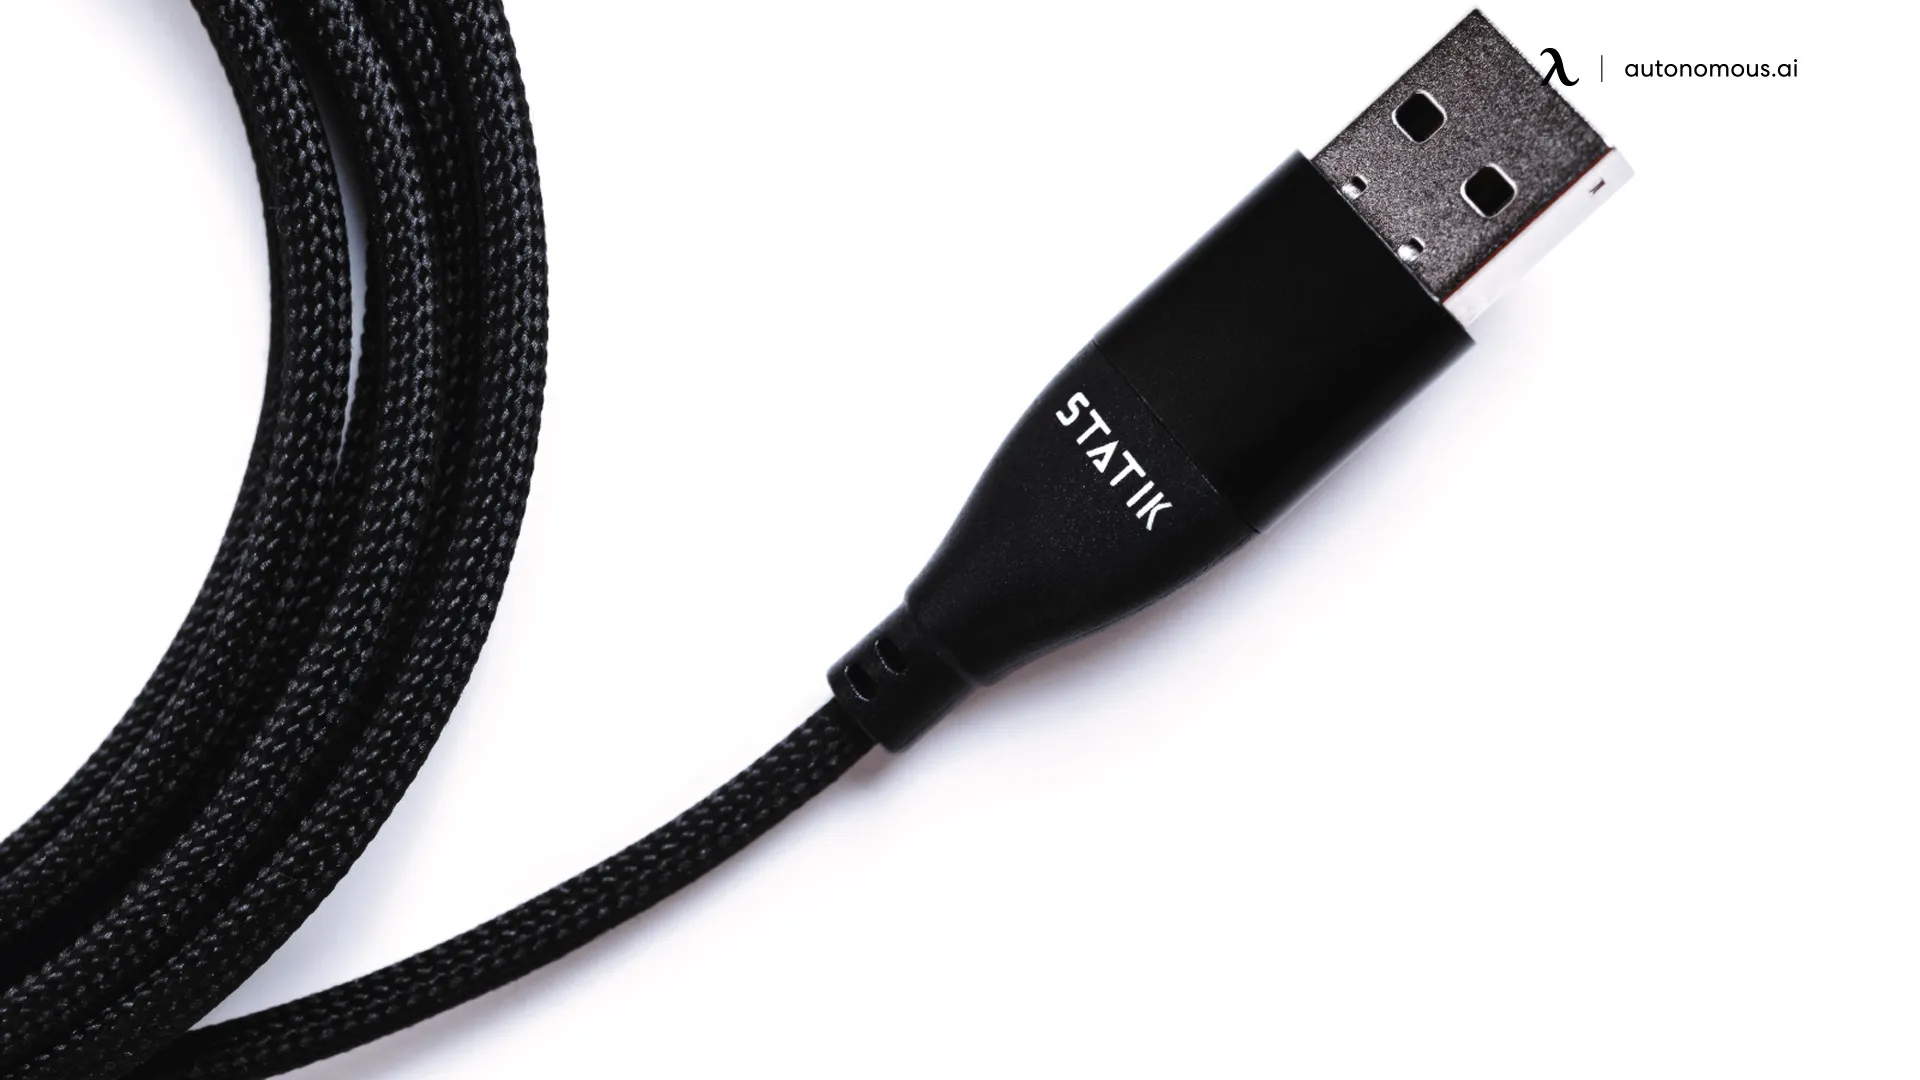 Built to Withstand - statik 360 magnetic charging cable